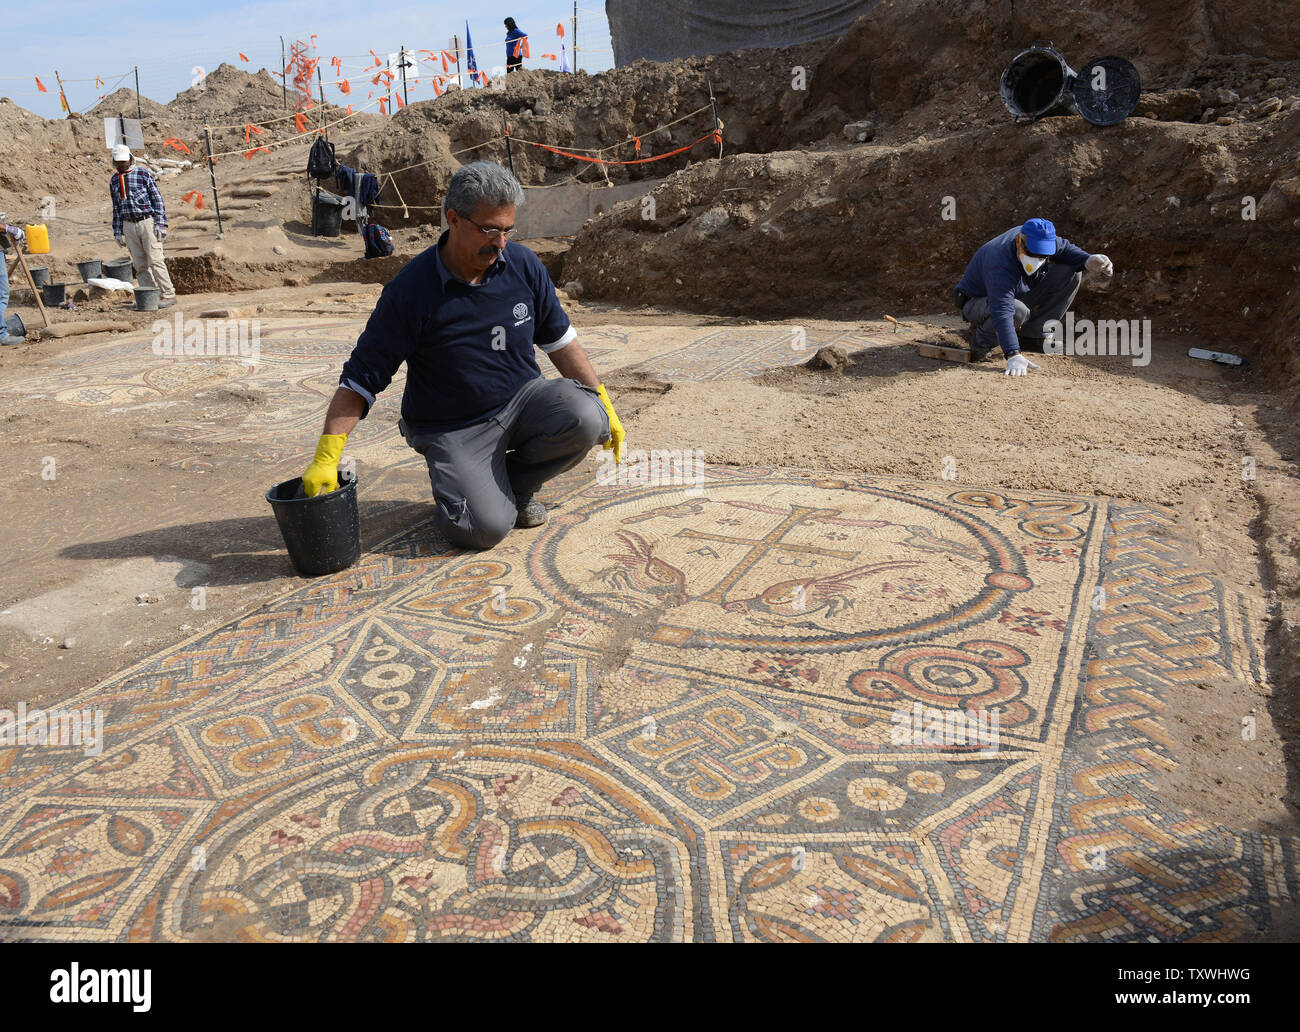 A worker from the Israel Antiquities Authority works on a large colorful mosaic with ancient inscriptions that was found in the remains of a large Byzantine Church, approximately,1,500 years old, during excavations by the Israel Antiquities Authority in Moshav Aluma, in southern Israel, January 22, 2014. The mosaic is a Christogram, with a cross-like figure, that symbolizes Jesus Christ, and birds lifting the symbol to Heaven. The Greek letters for Alpha and Omega are also found in the mosaic. The church is 22 meters long and 12 meters wide and was part of a large and important Byzantine settl Stock Photo